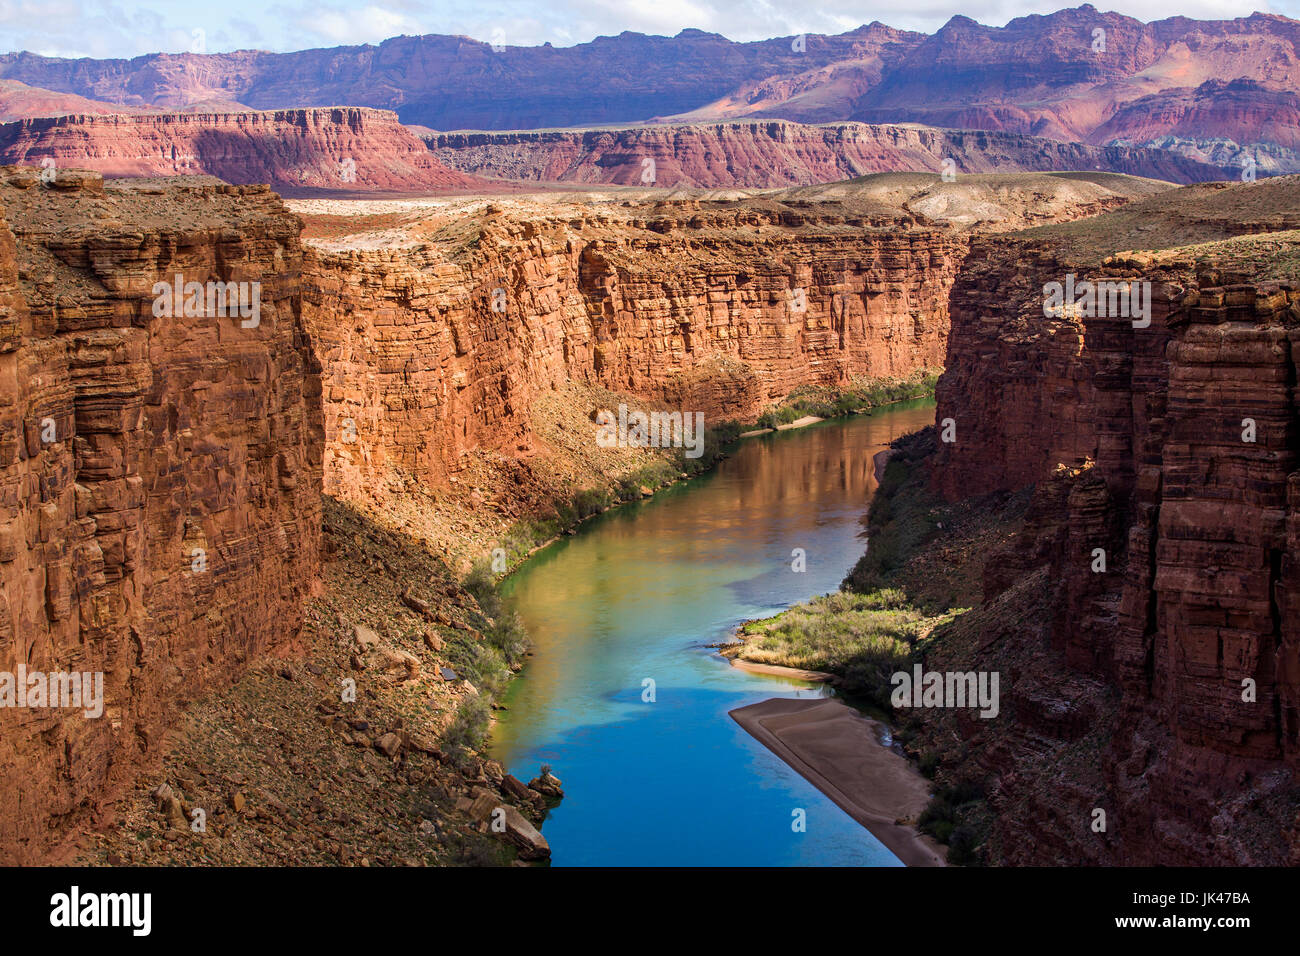 Scenic view of canyon river Stock Photo